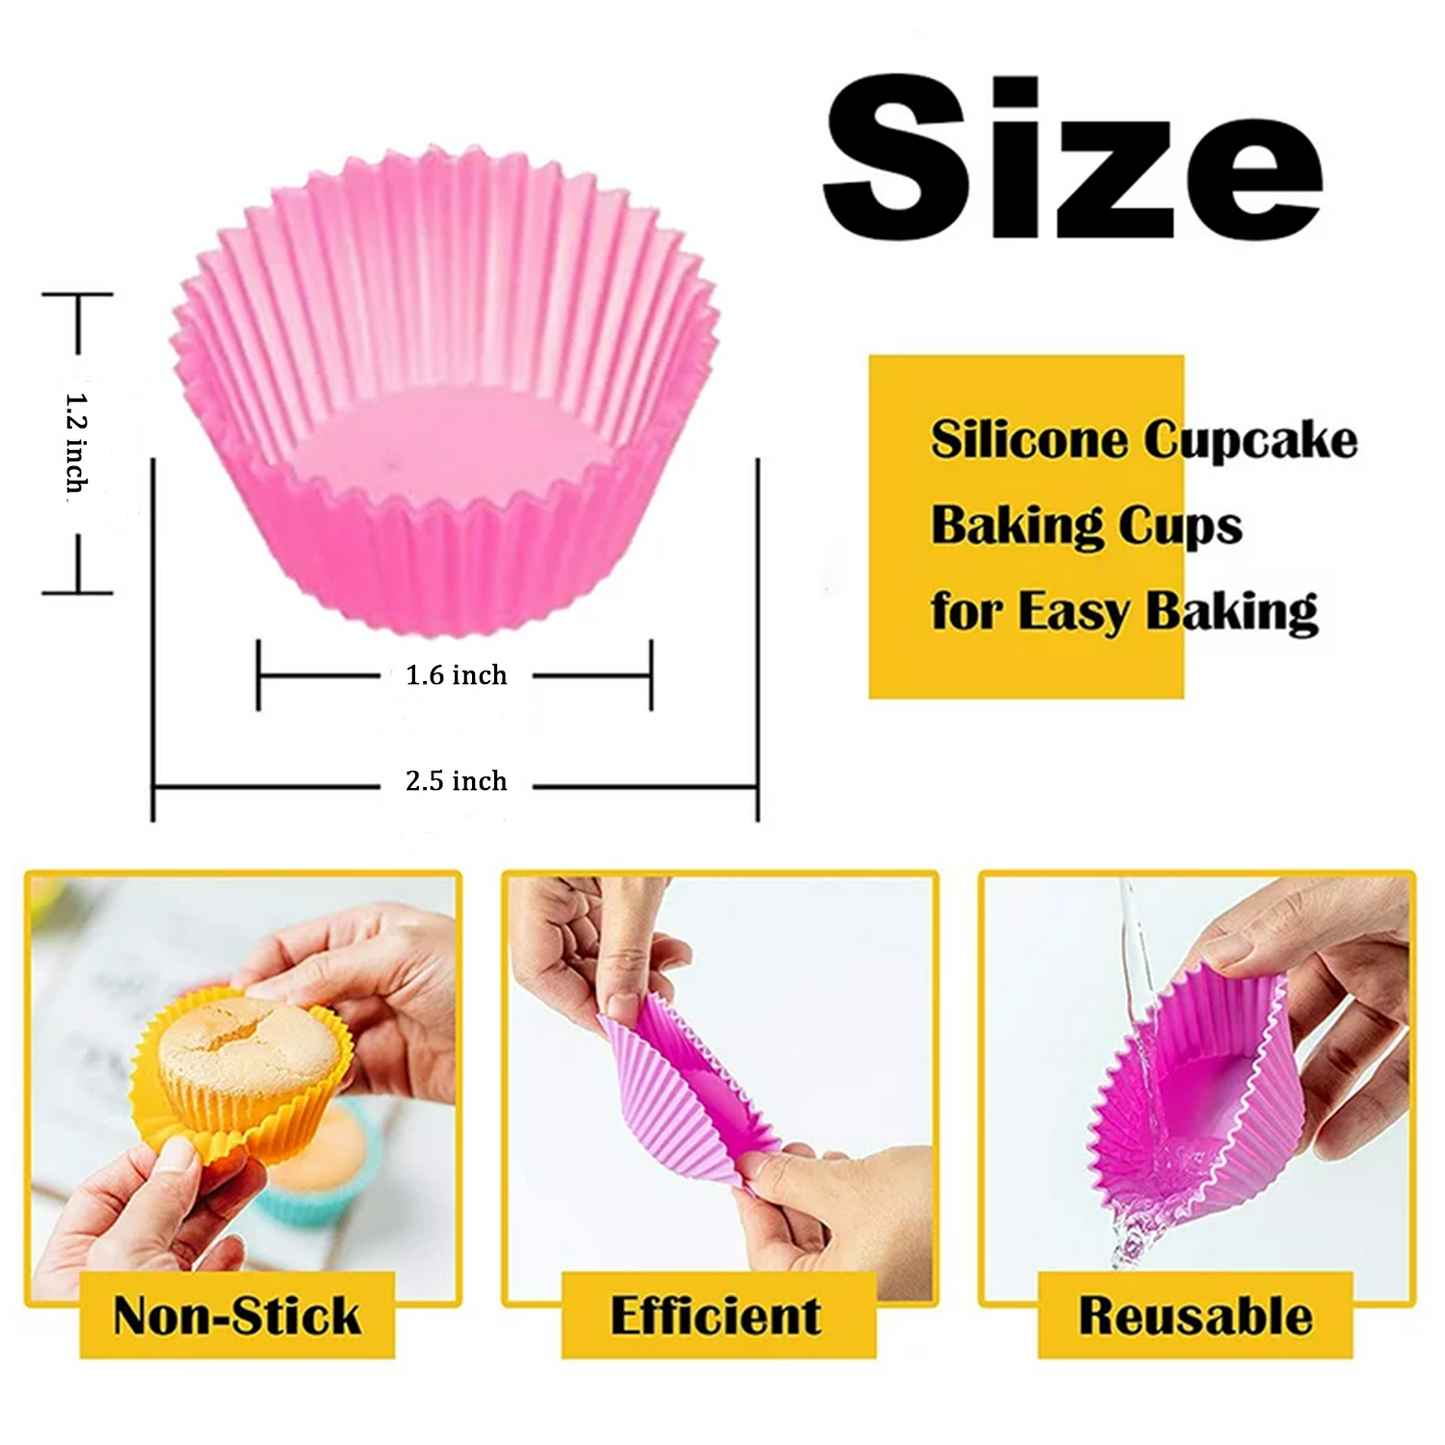 Silicone Cupcake Baking Cups, Reusable & Non-stick Muffin Cupcake Liners Holders Set for Party Halloween Christmas, Easy Clean Pastry Muffin Molds（Pack of 40, Multicolor）